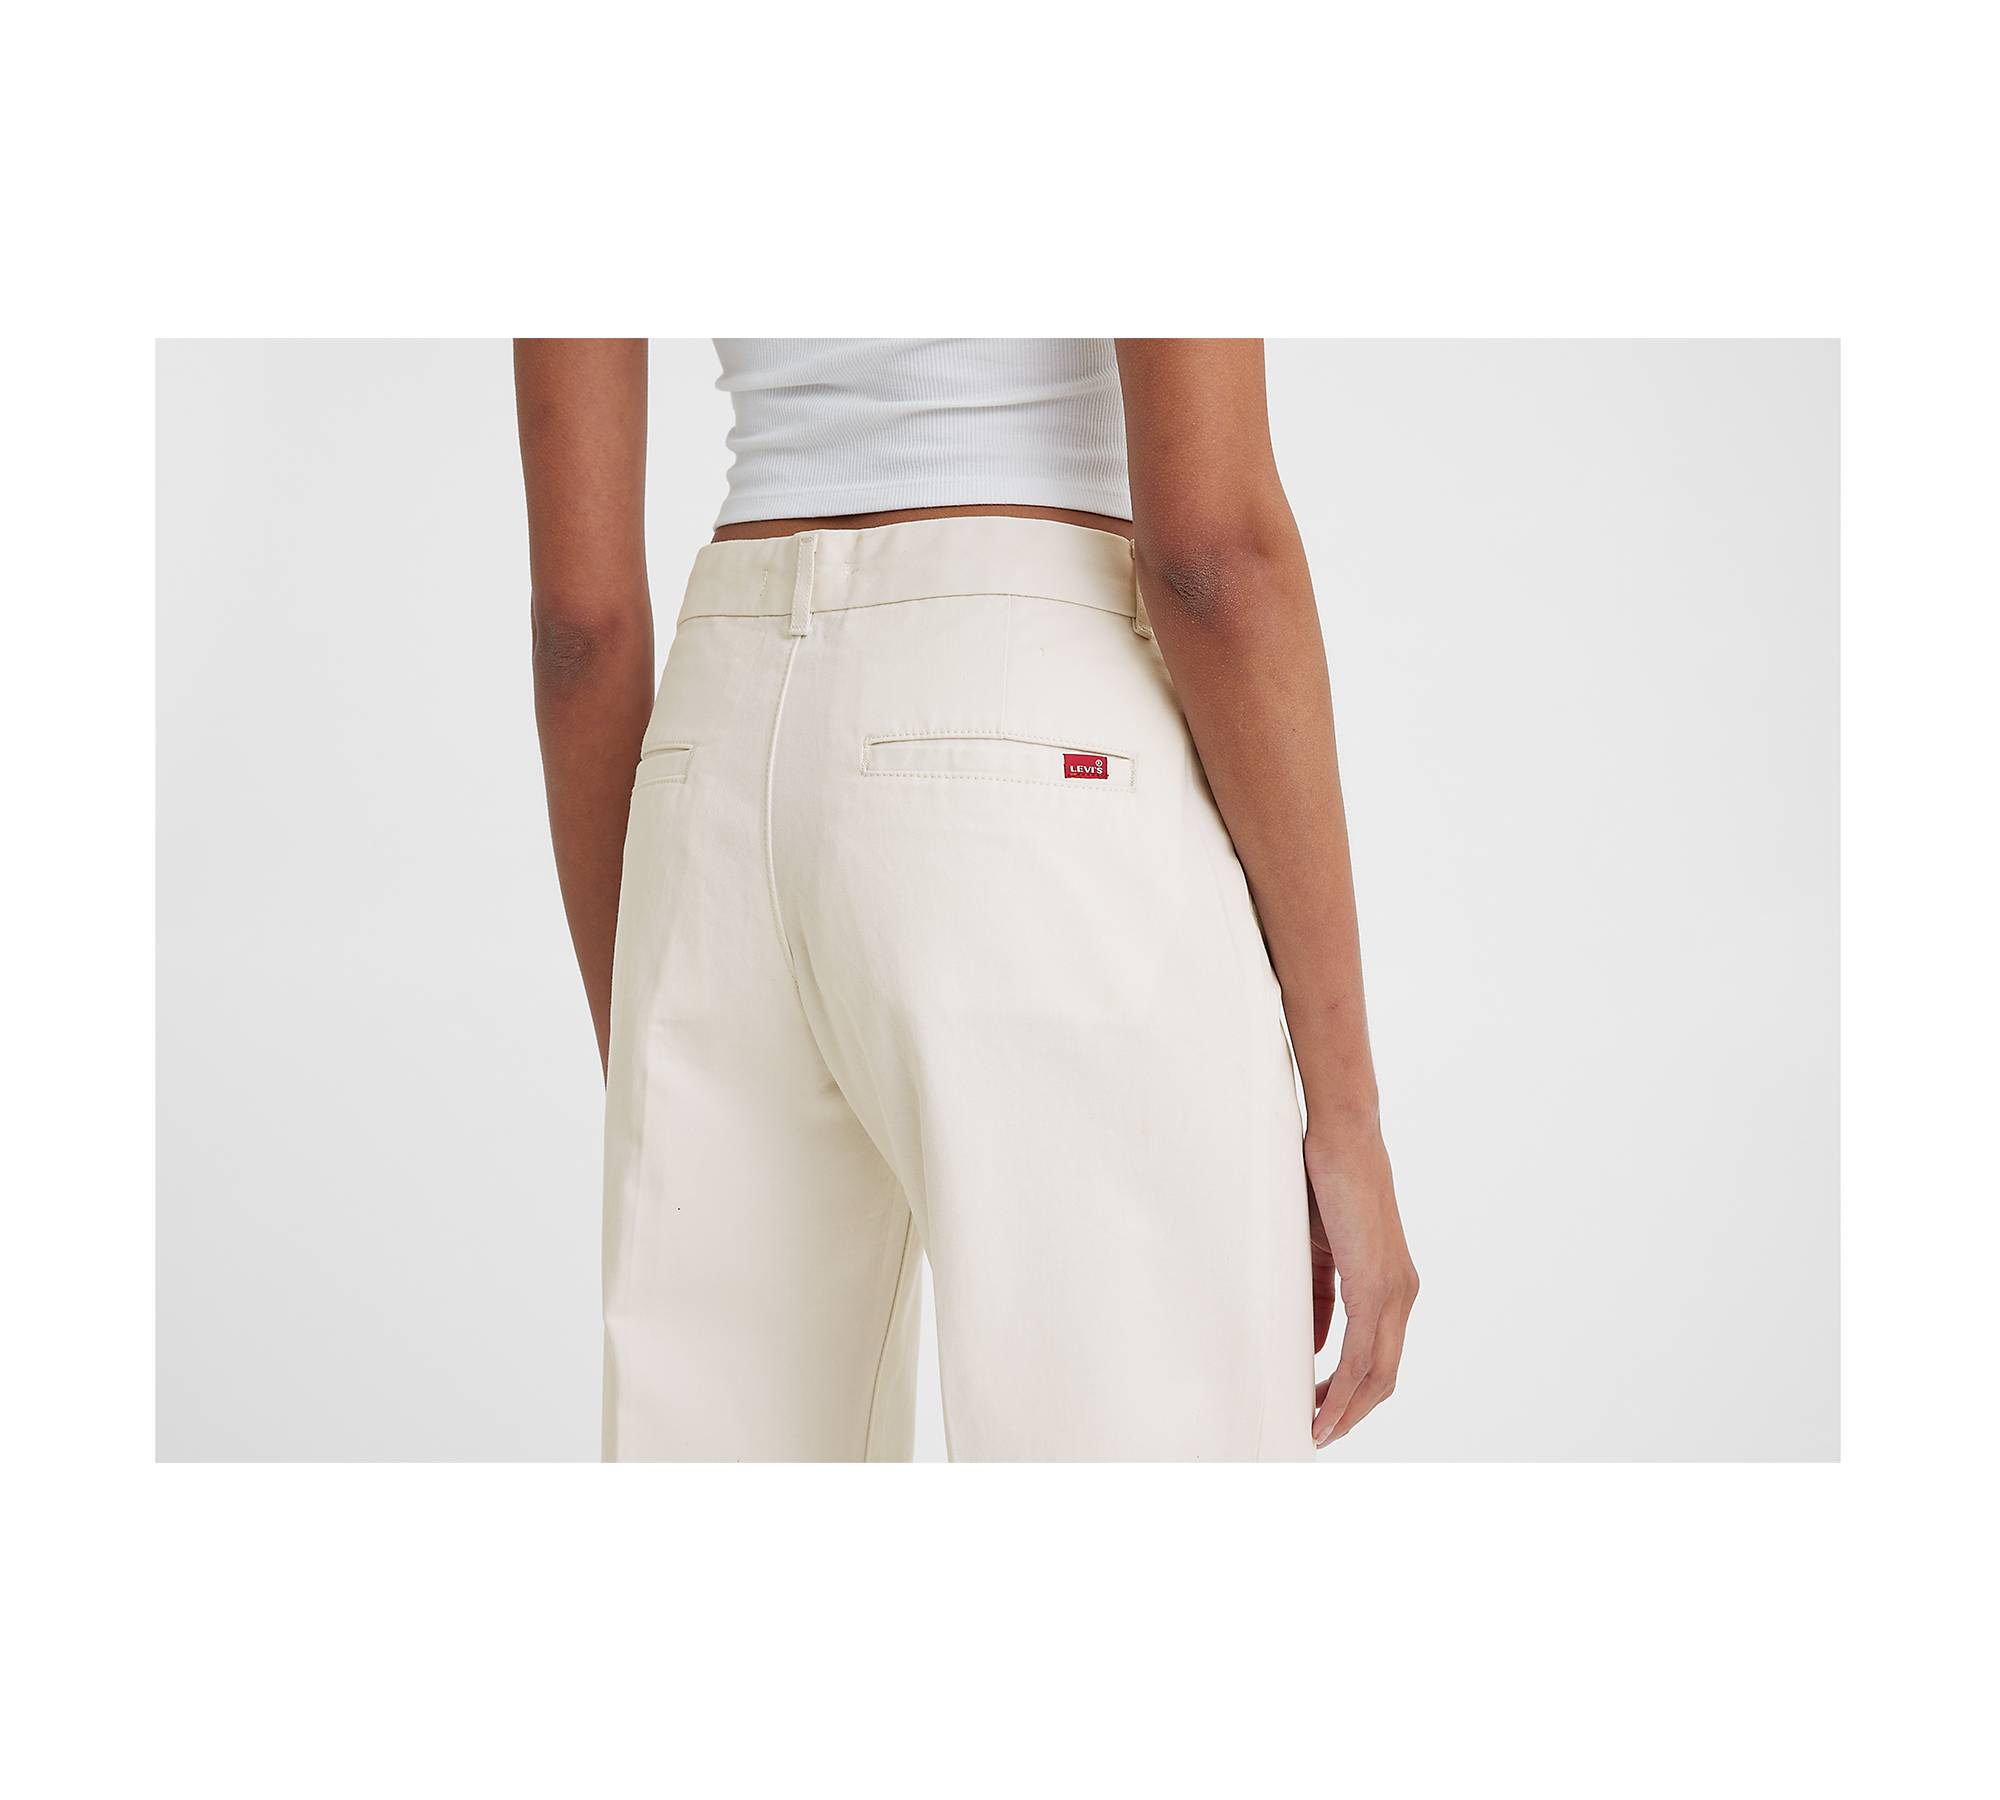 White trousers high waist for women comfortable and loose chiffon